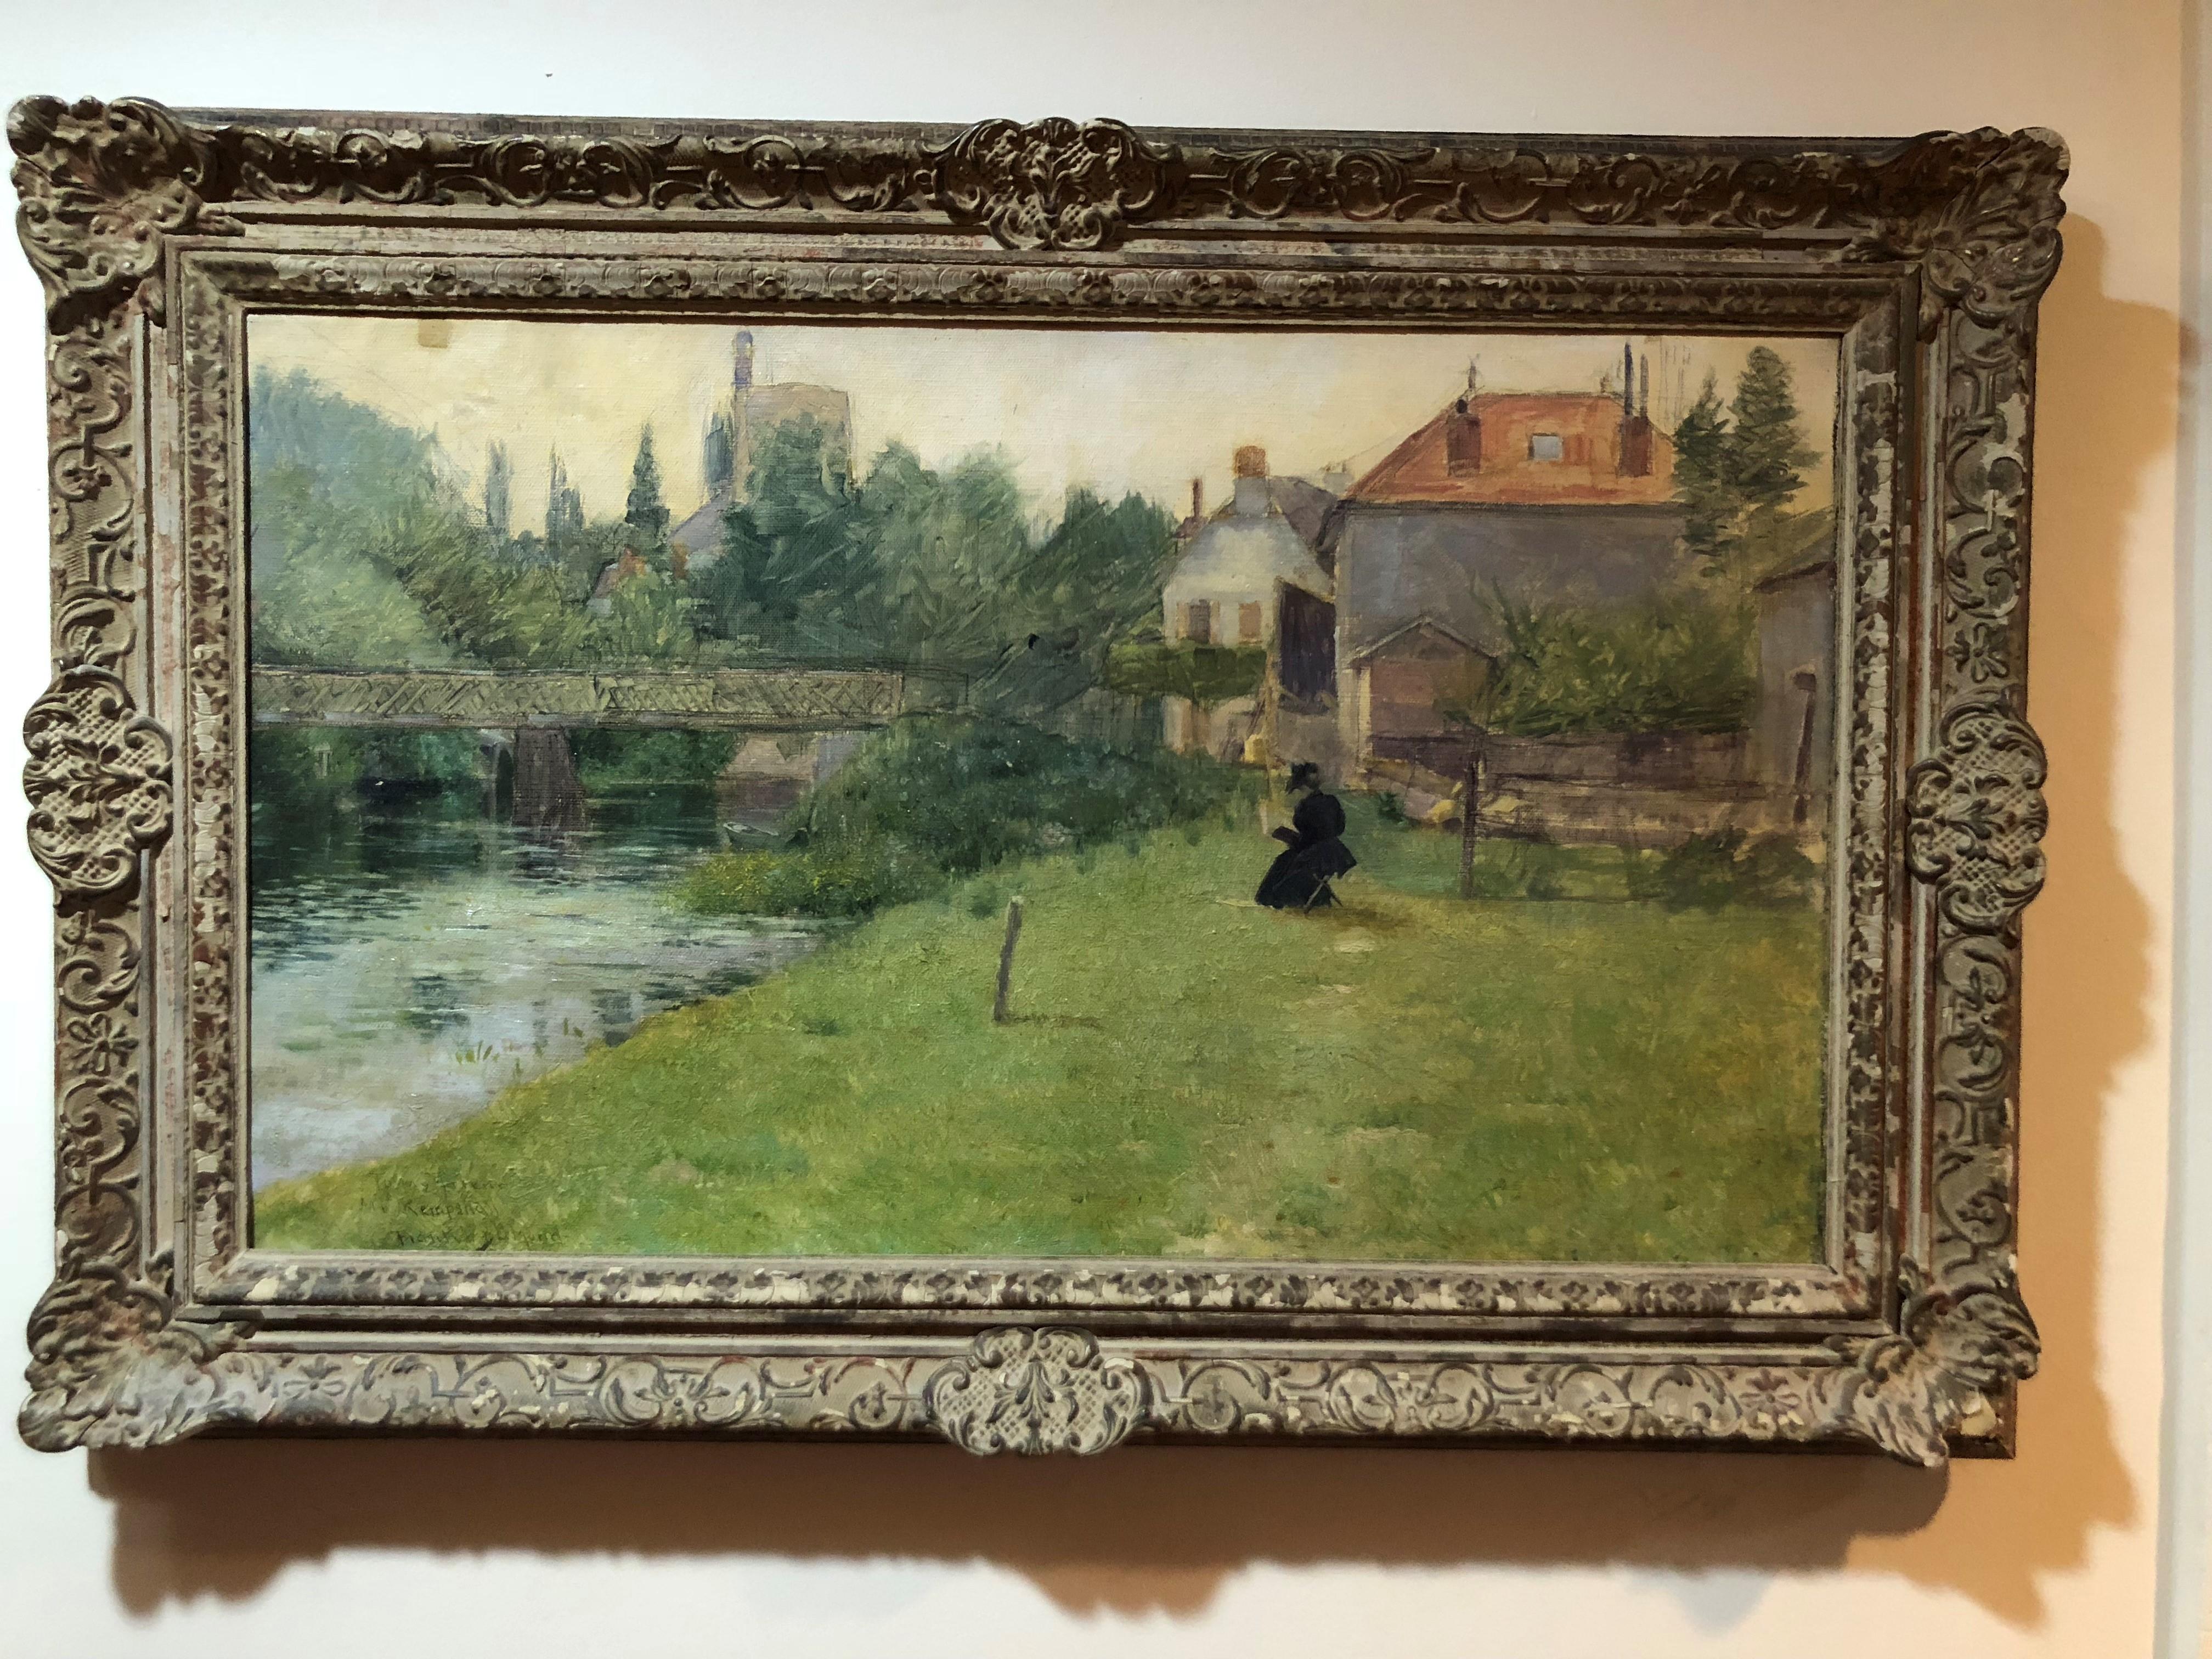 Frank Vincent DuMond painting. Bucolic setting of a woman in a pastoral scene by a river. She is seated reading and dressed in an Edwardian, early 20th century clothing. Signed lower left. 